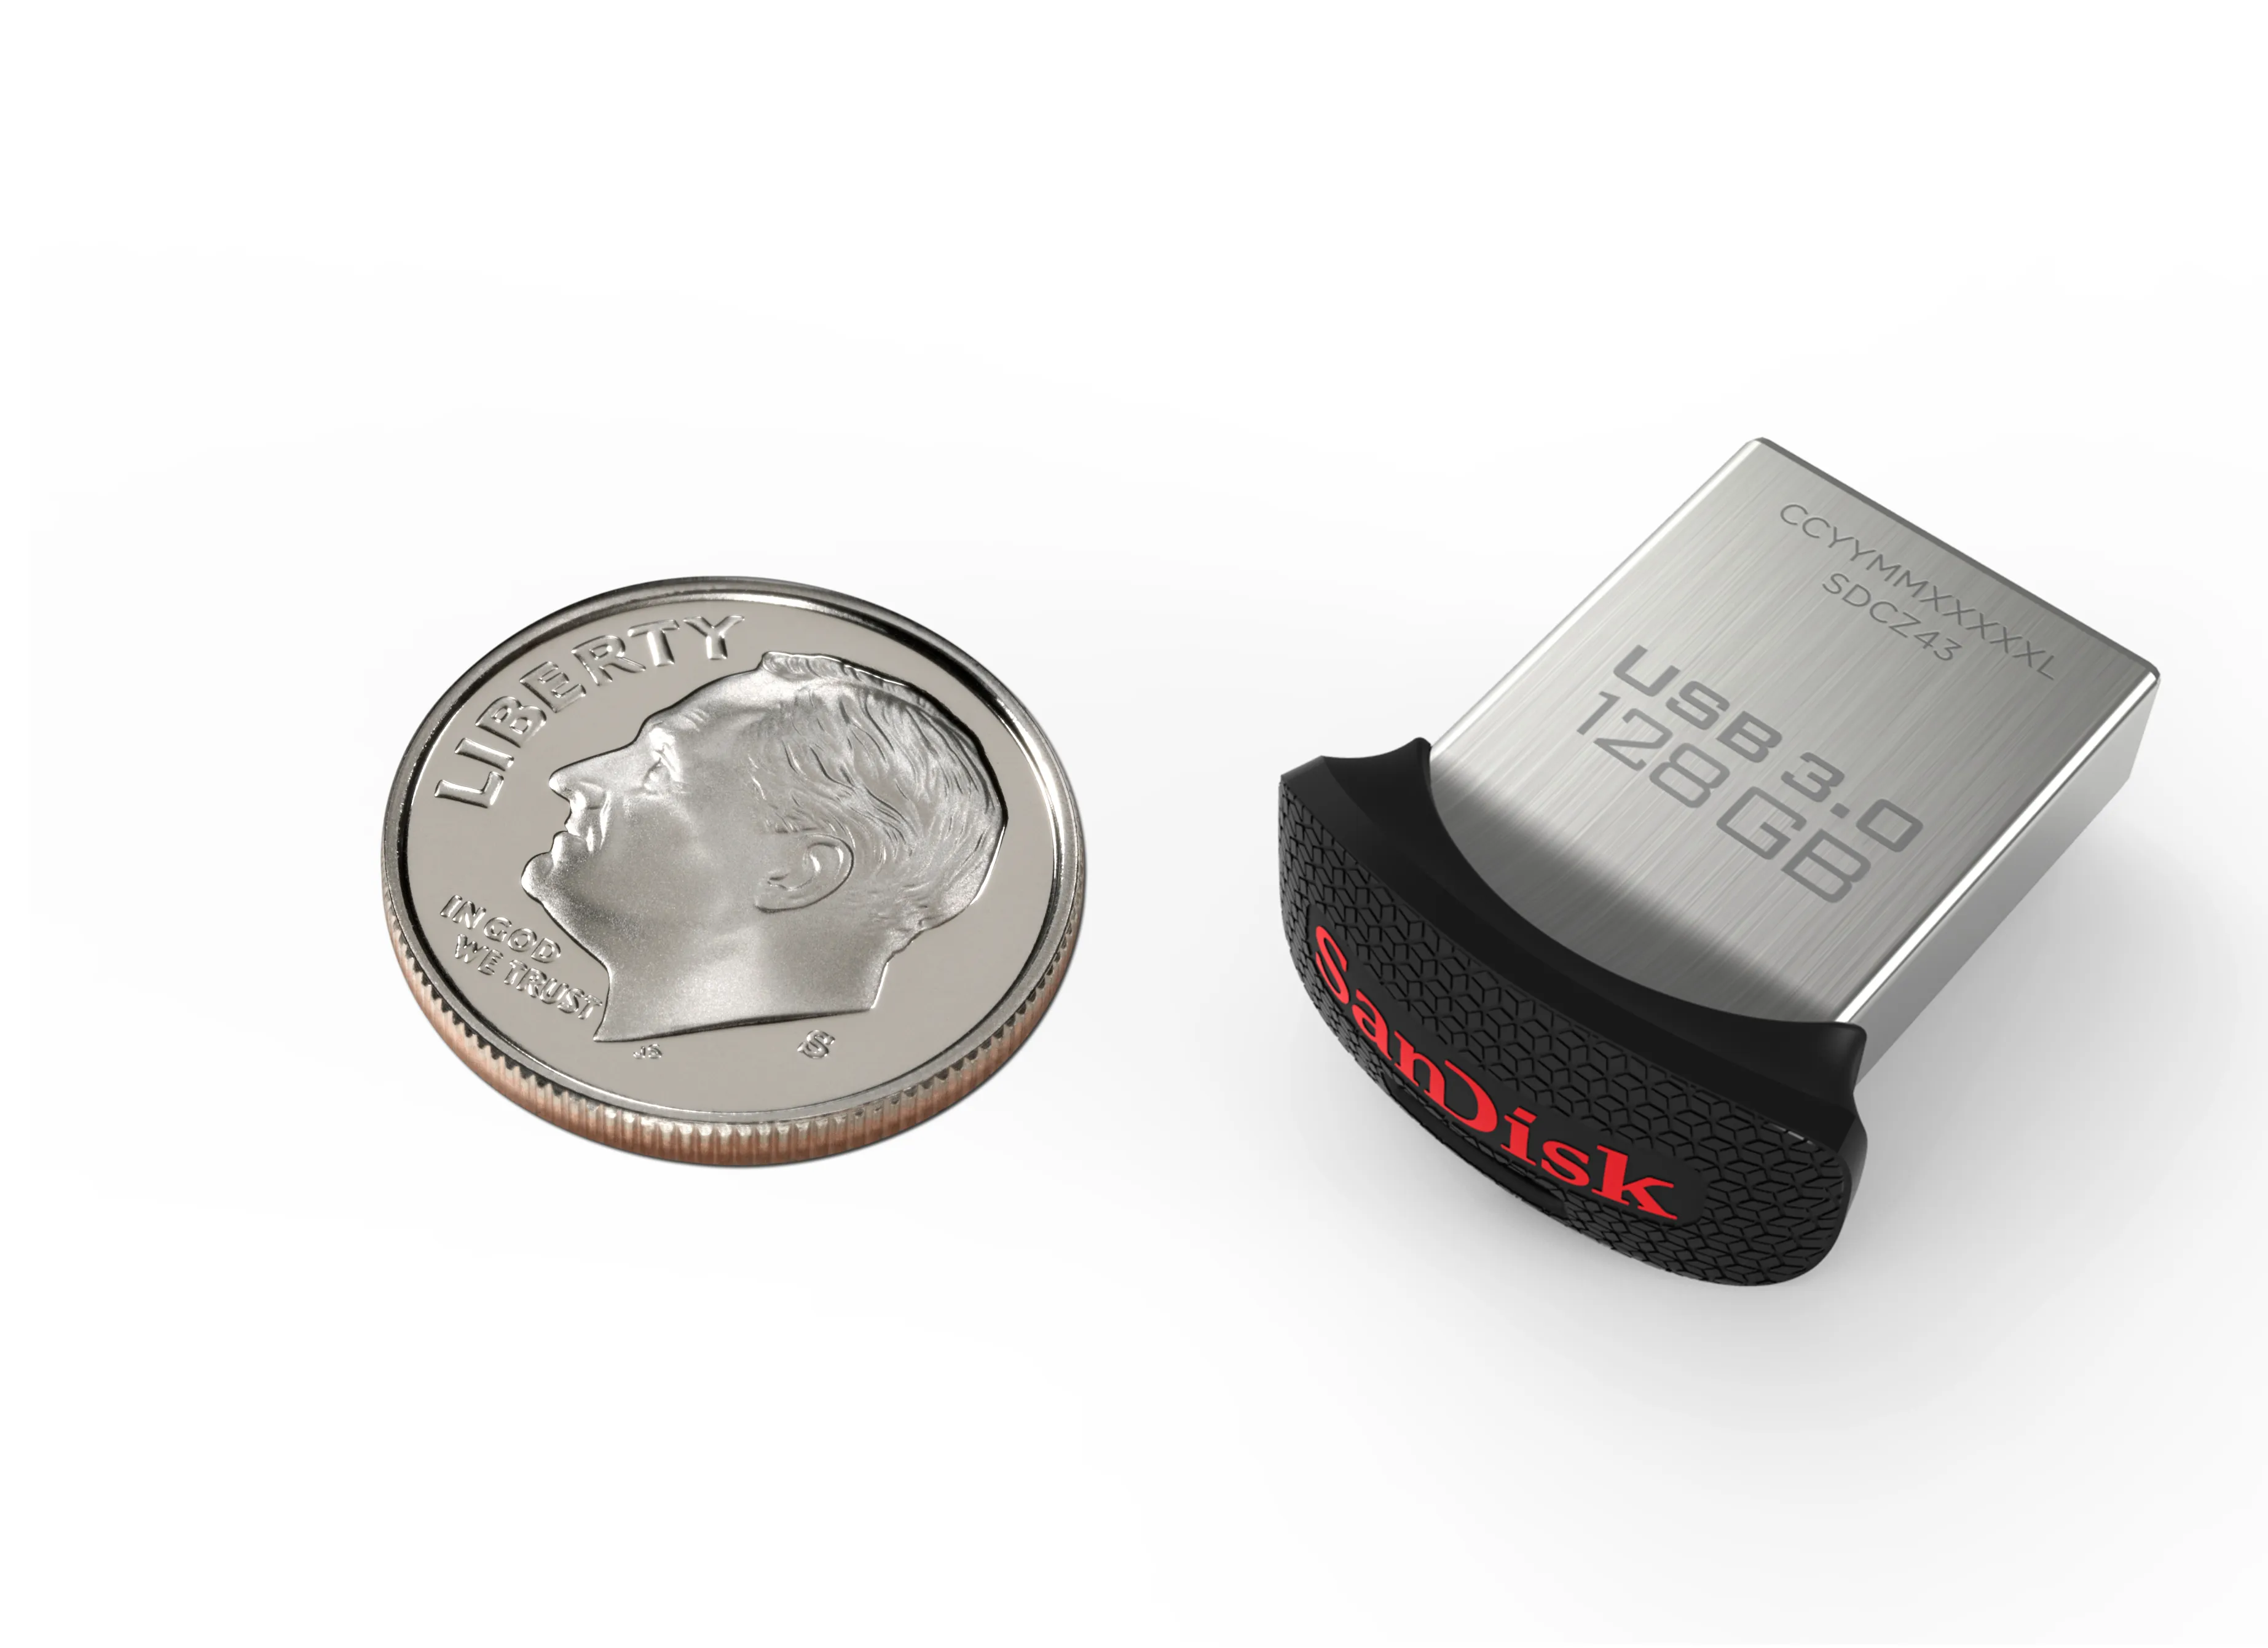 We Hope You Never Lose the World's Smallest USB Drive